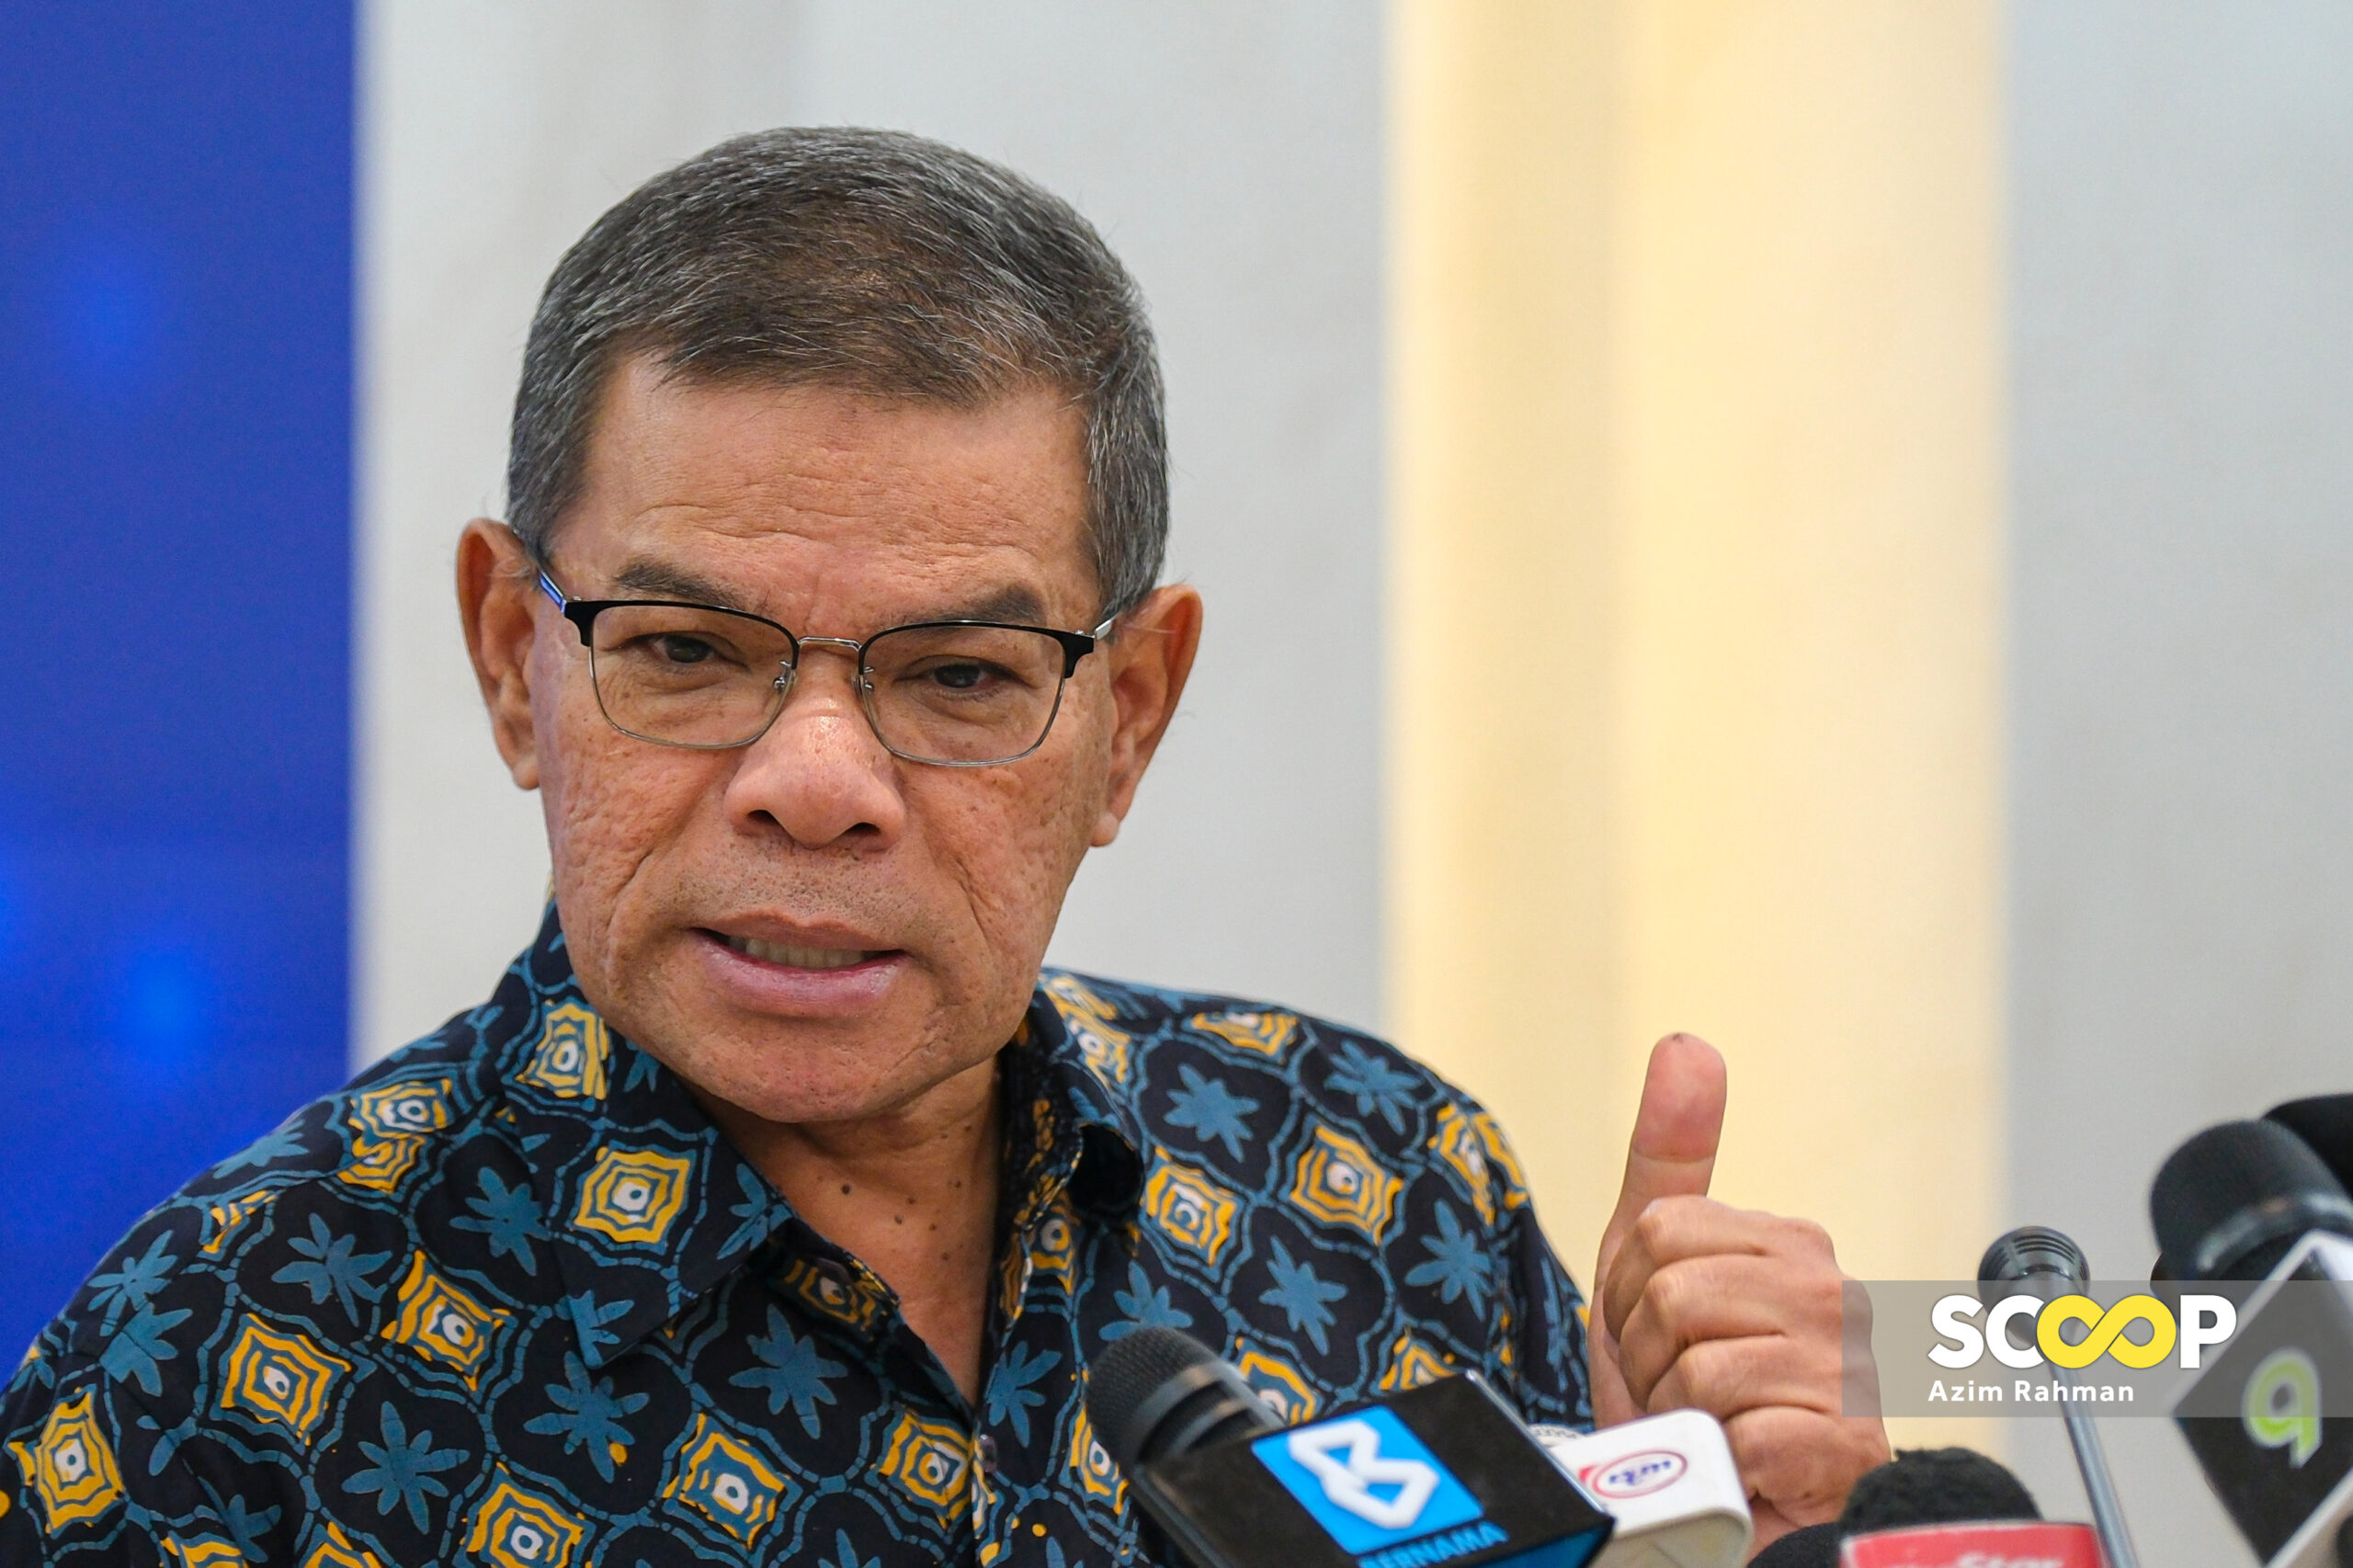 Saifuddin reveals plan to employ AI for stricter border control